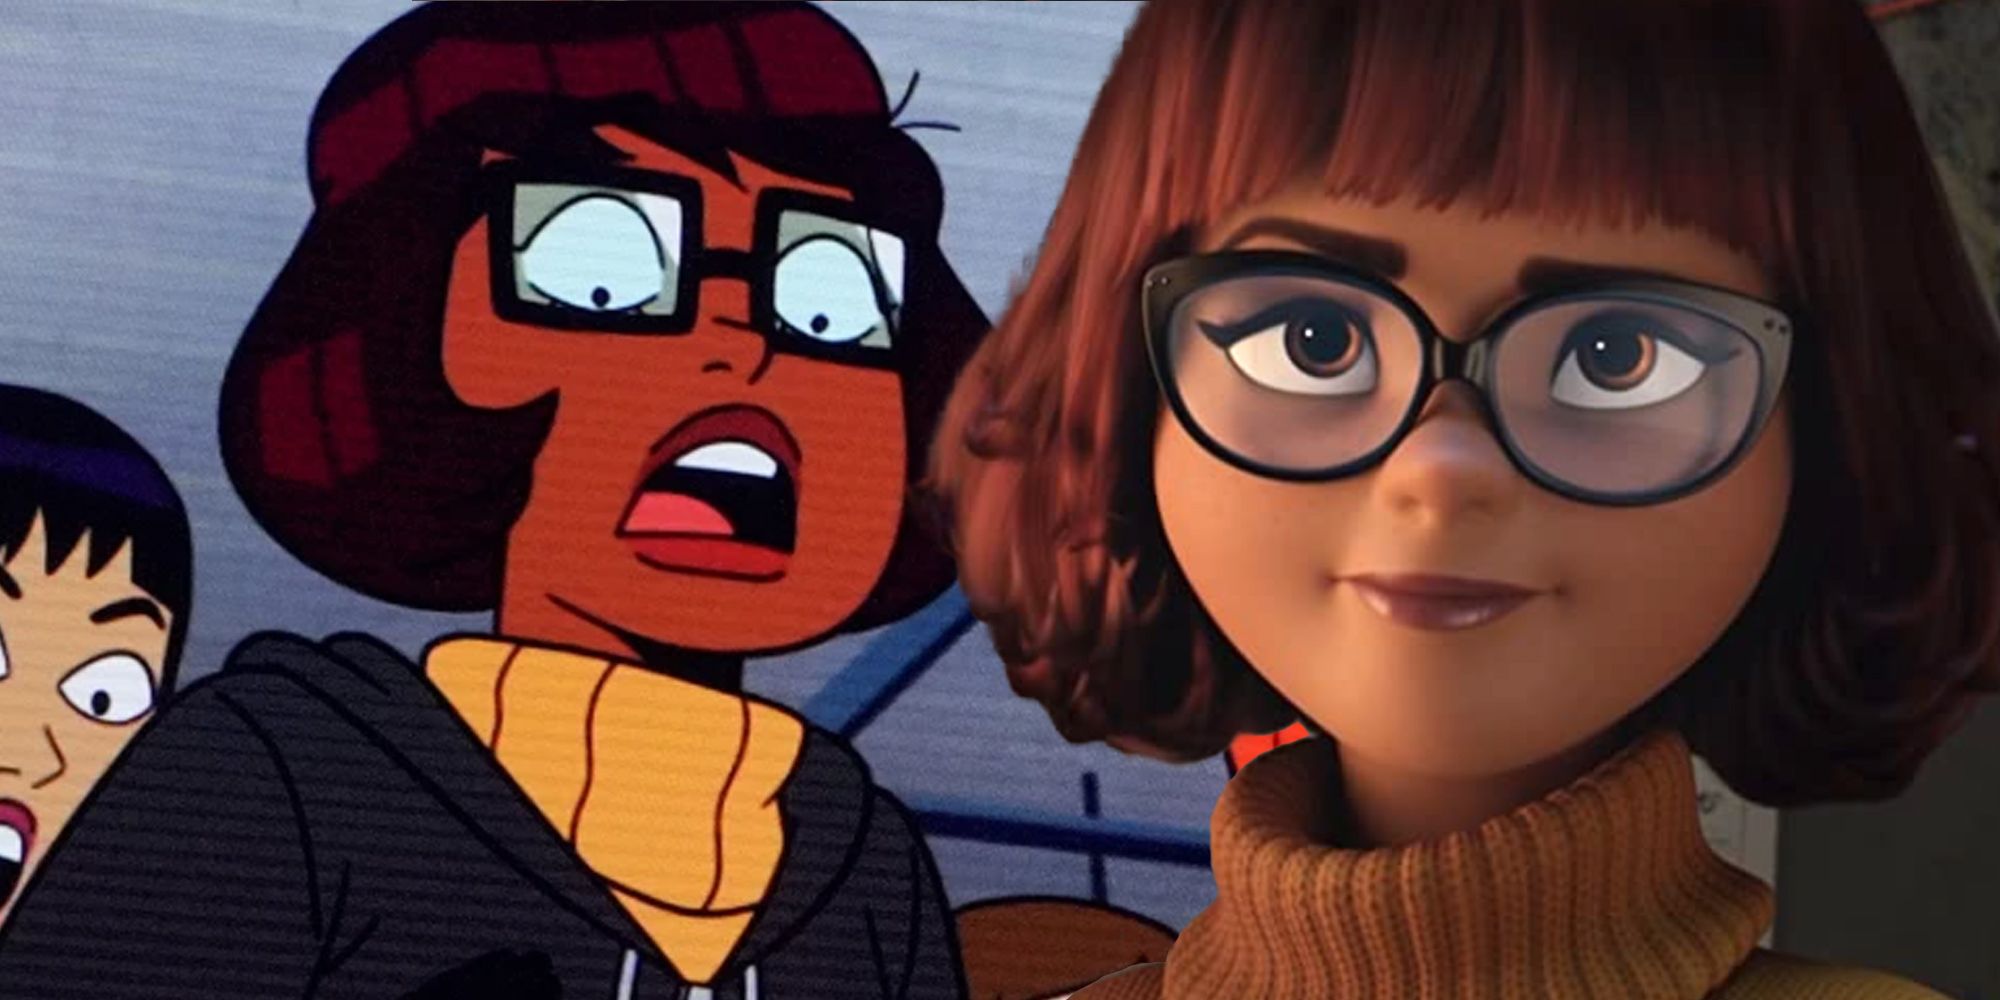 Velma Trailer And Images Reveal Redesigned Scooby Doo Mystery Inc Characters